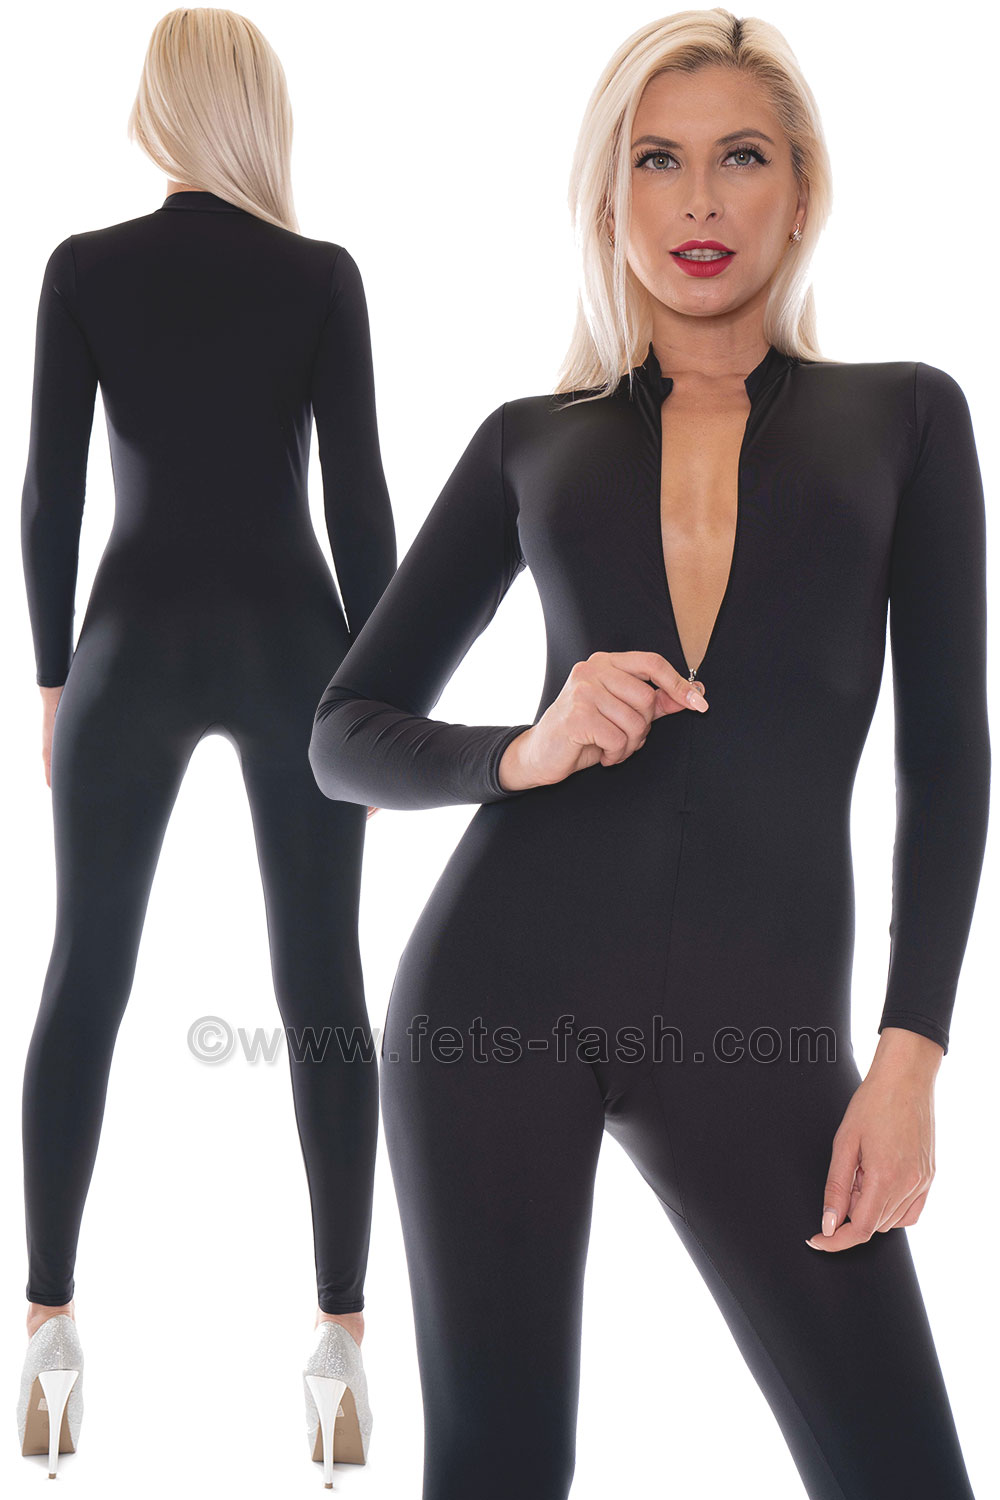 Catsuit With Front Zipper From Fets Fash In Elastane Black Cotton